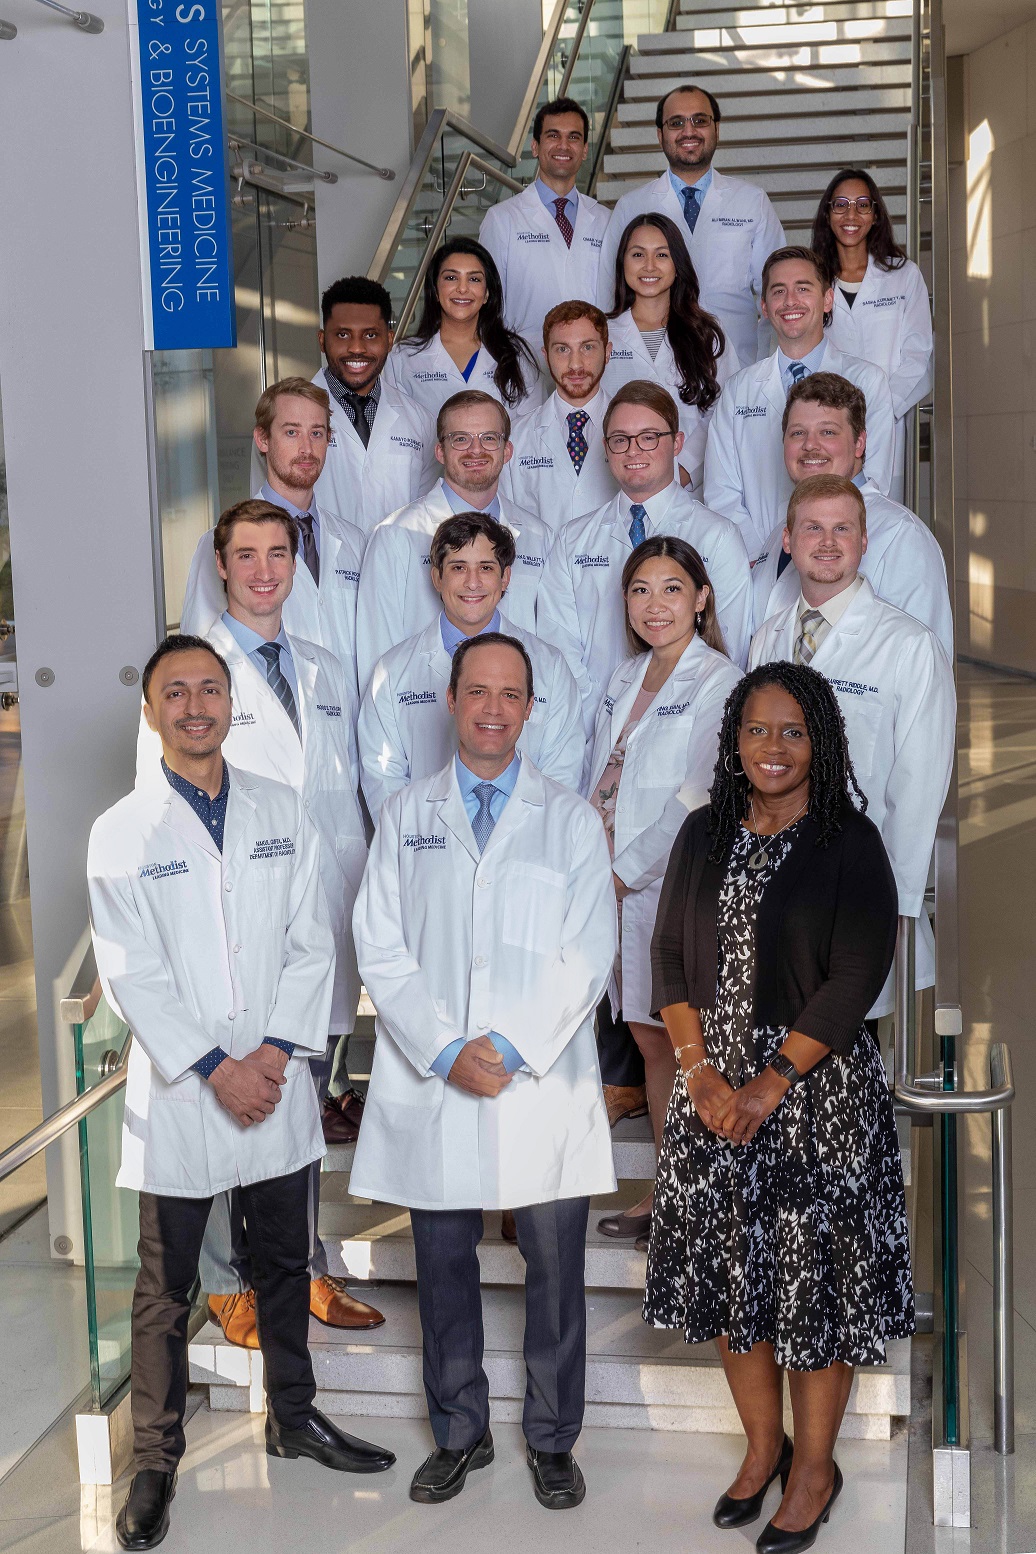 Group photo of Radiology residents and faculty